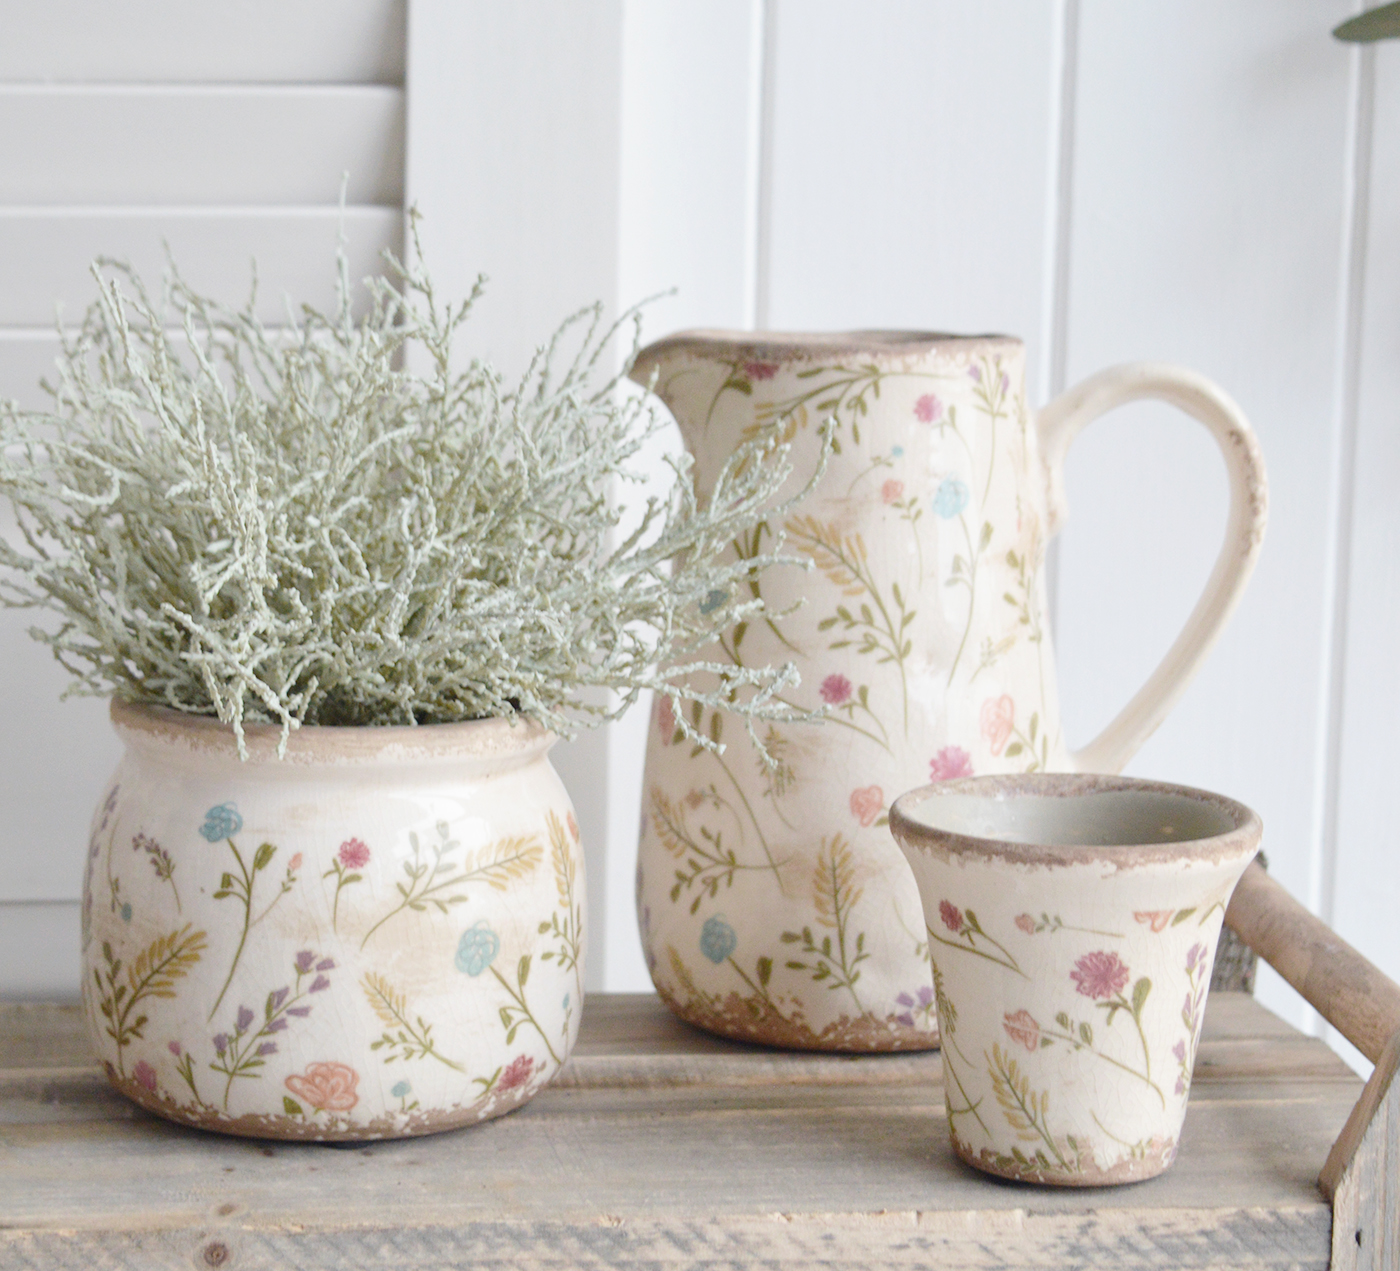 Marston Aged Vintage Style Ceramics - New England, coastal, modern farmhouse and country homes interiors and furniture